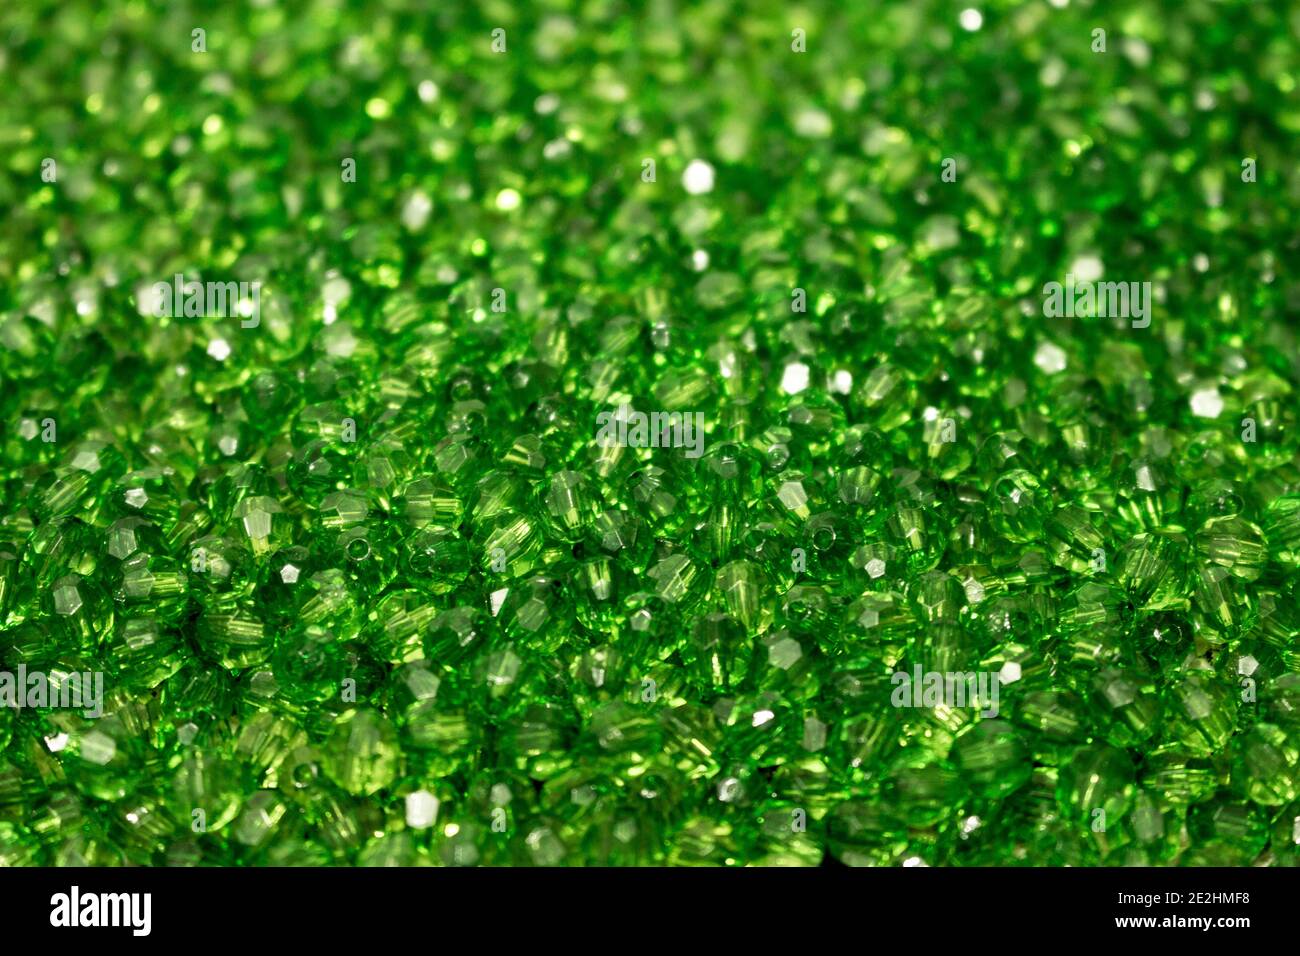 Group of green glass beads together forming a texture Stock Photo